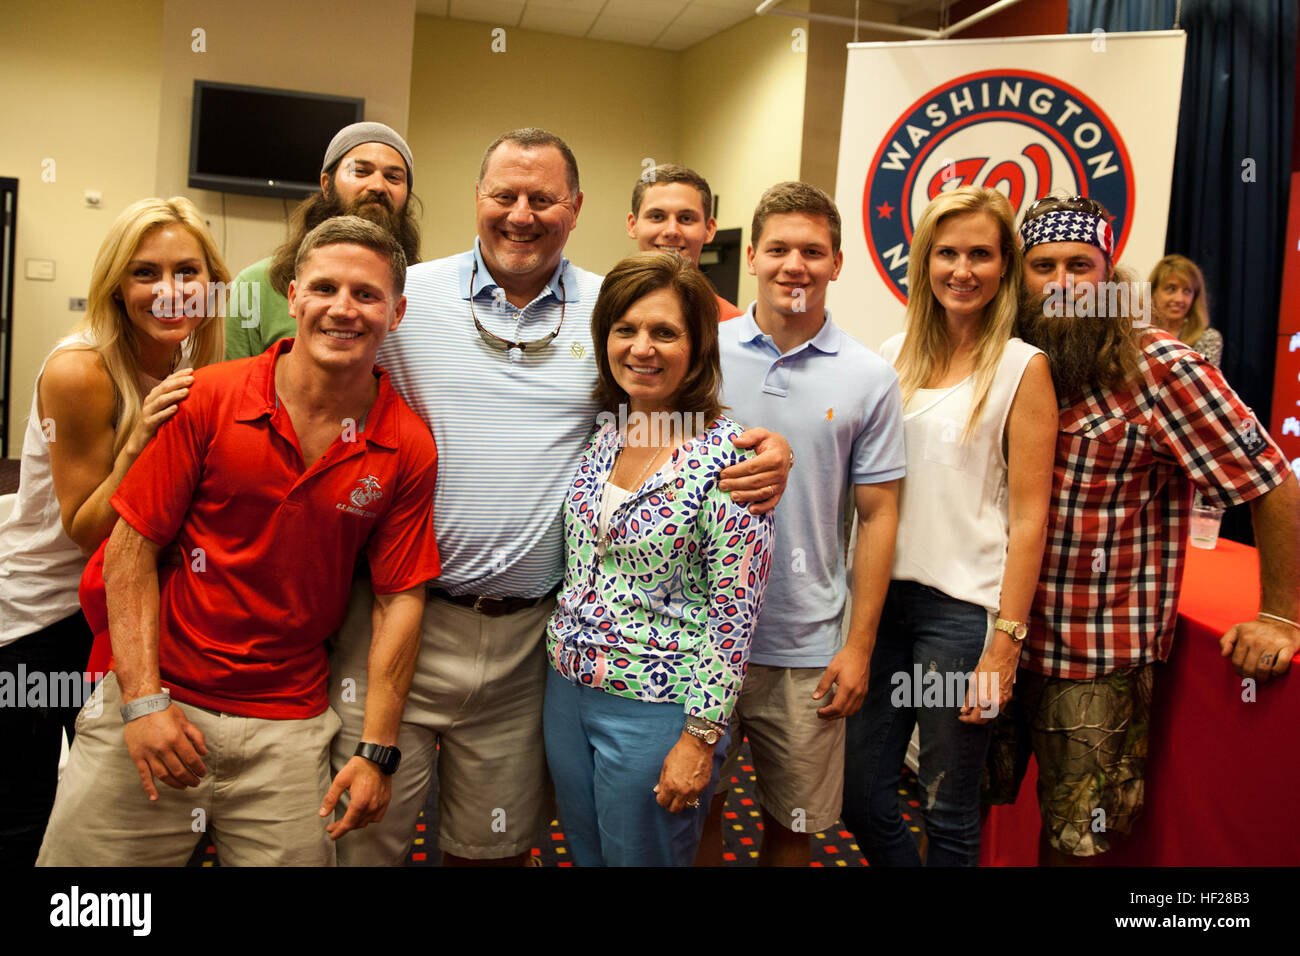 Retired U.S. Marine Corps Cpl. William Kyle Carpenter, second from left, poses for a photo with family members and reality television stars after attending a baseball game at Nationals Park in Washington, D.C., June 17, 2014. Carpenter will receive the Medal of Honor from the President of the United States Barack Obama during a ceremony at the White House on Thursday, June 19, 2014. (U.S. Marine Corps photo by Cpl. Michael C. Guinto/Released) Medal of Honor Kyle Carpenter 140617-M-LI307-484 Stock Photo